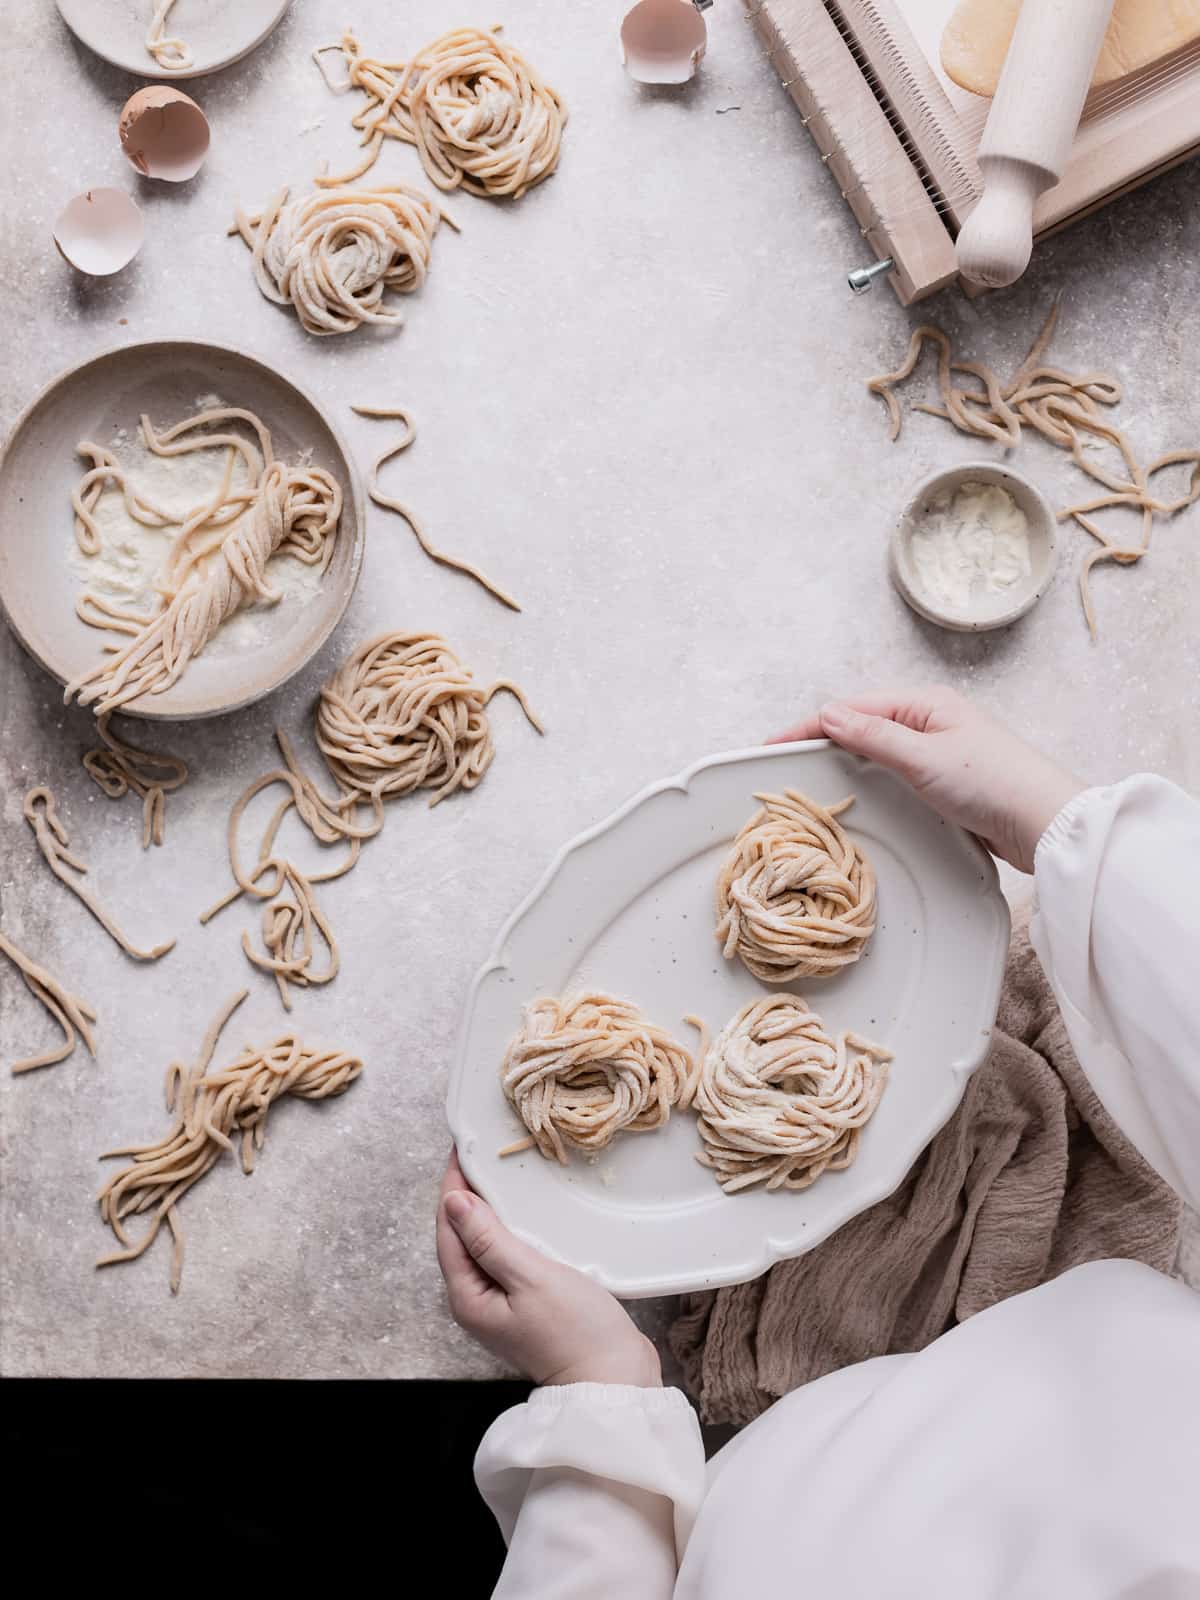 Hands holding a serving dish with some tonnarelli nests on it, while the backdrops has more pasta nest and chitarra toll pasta around the hands.